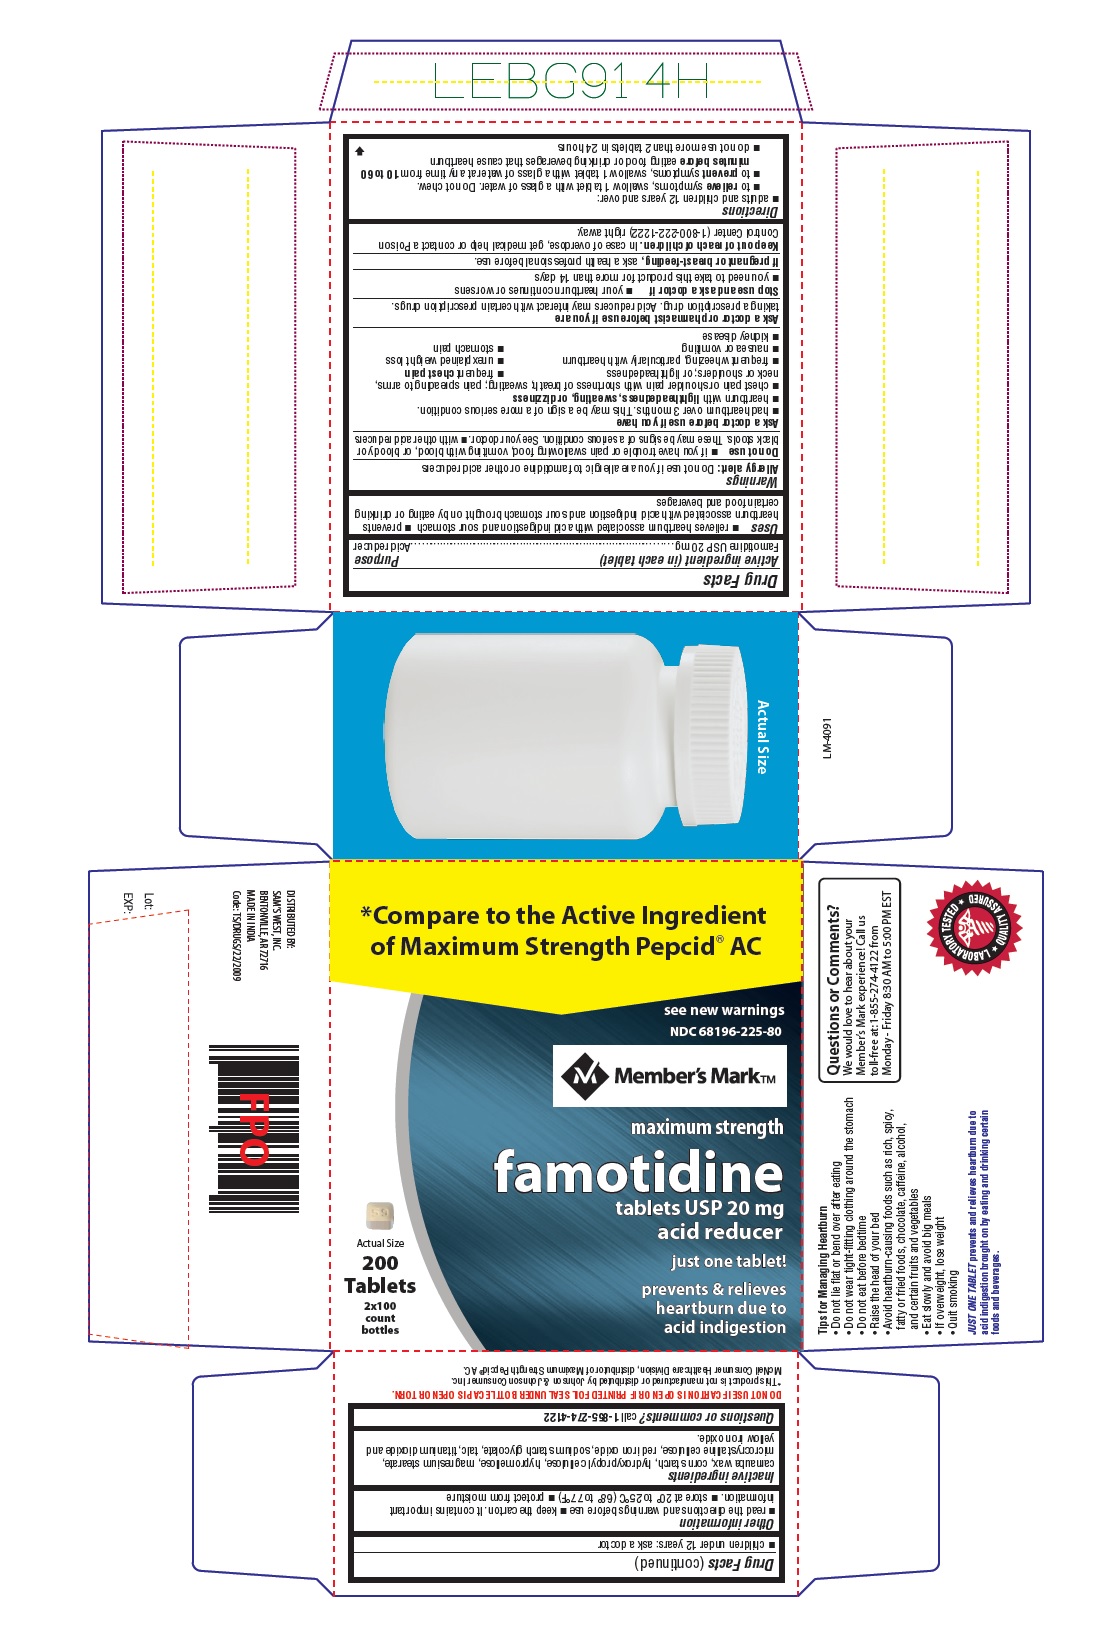 PACKAGE LABEL-PRINCIPAL DISPLAY PANEL -20 mg (2x100 Tablets, Container Carton Label)